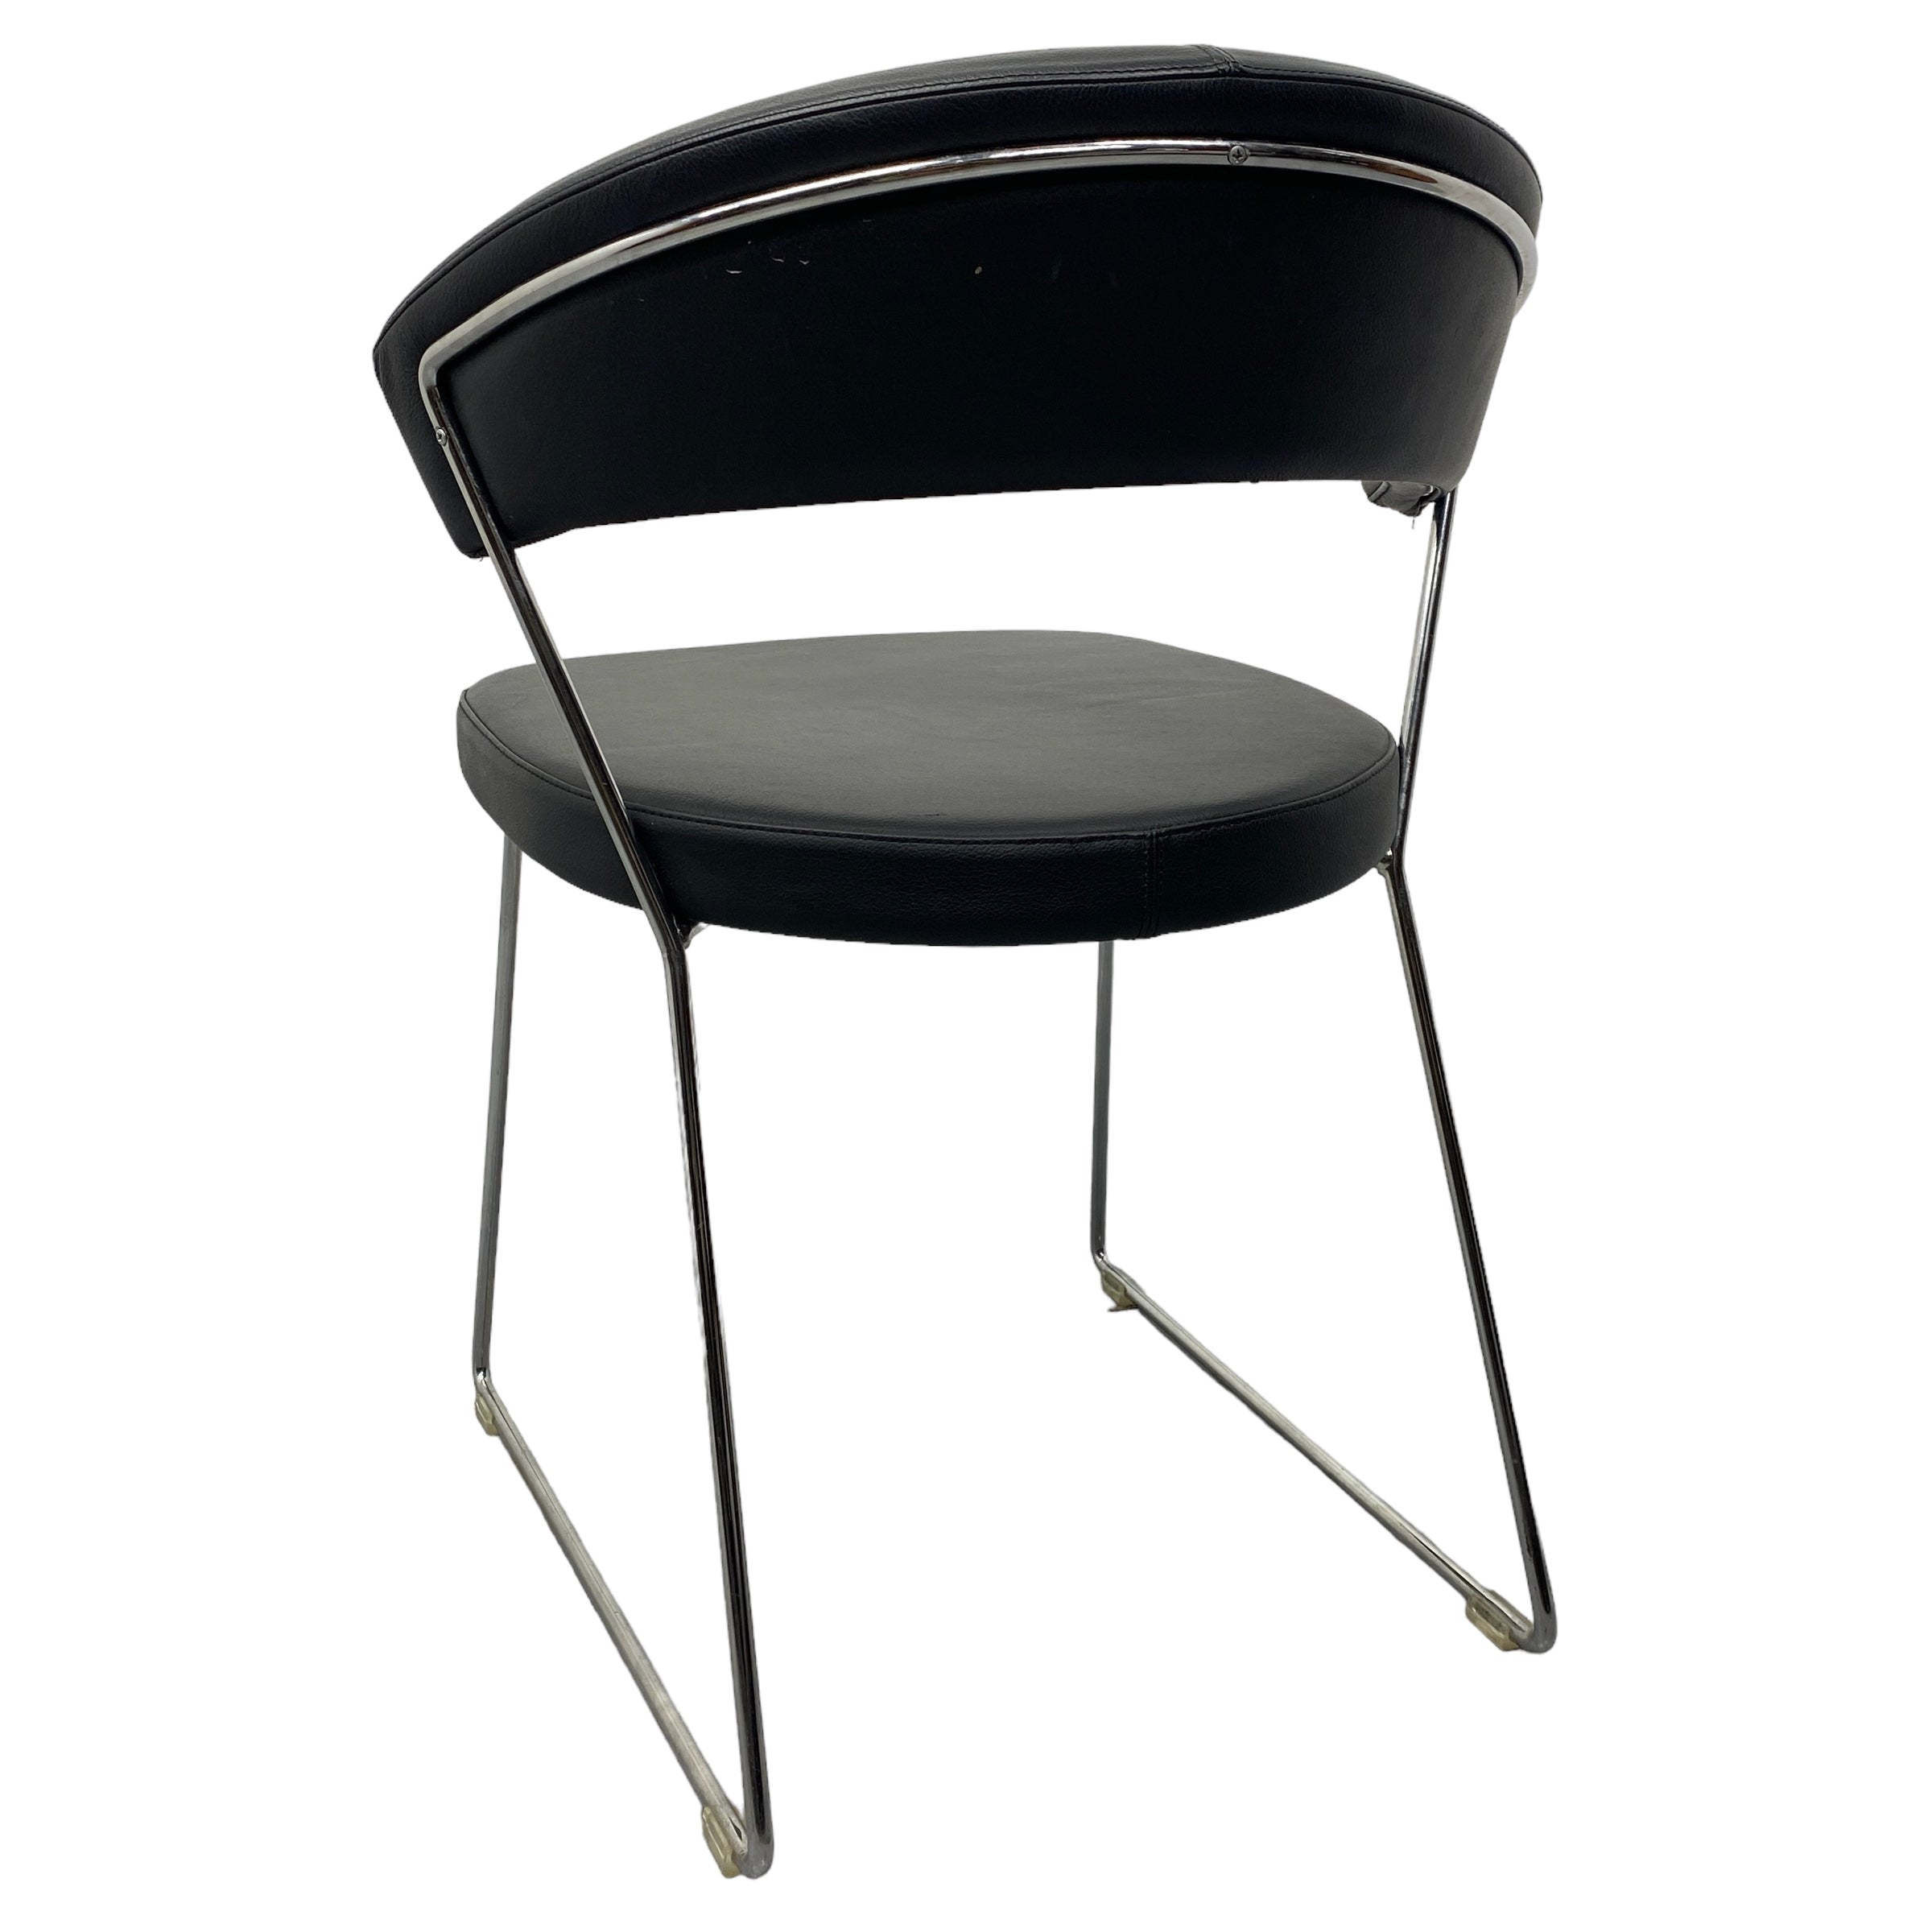 Steel Legs Calligaris New York Dining Chairs Black Leather